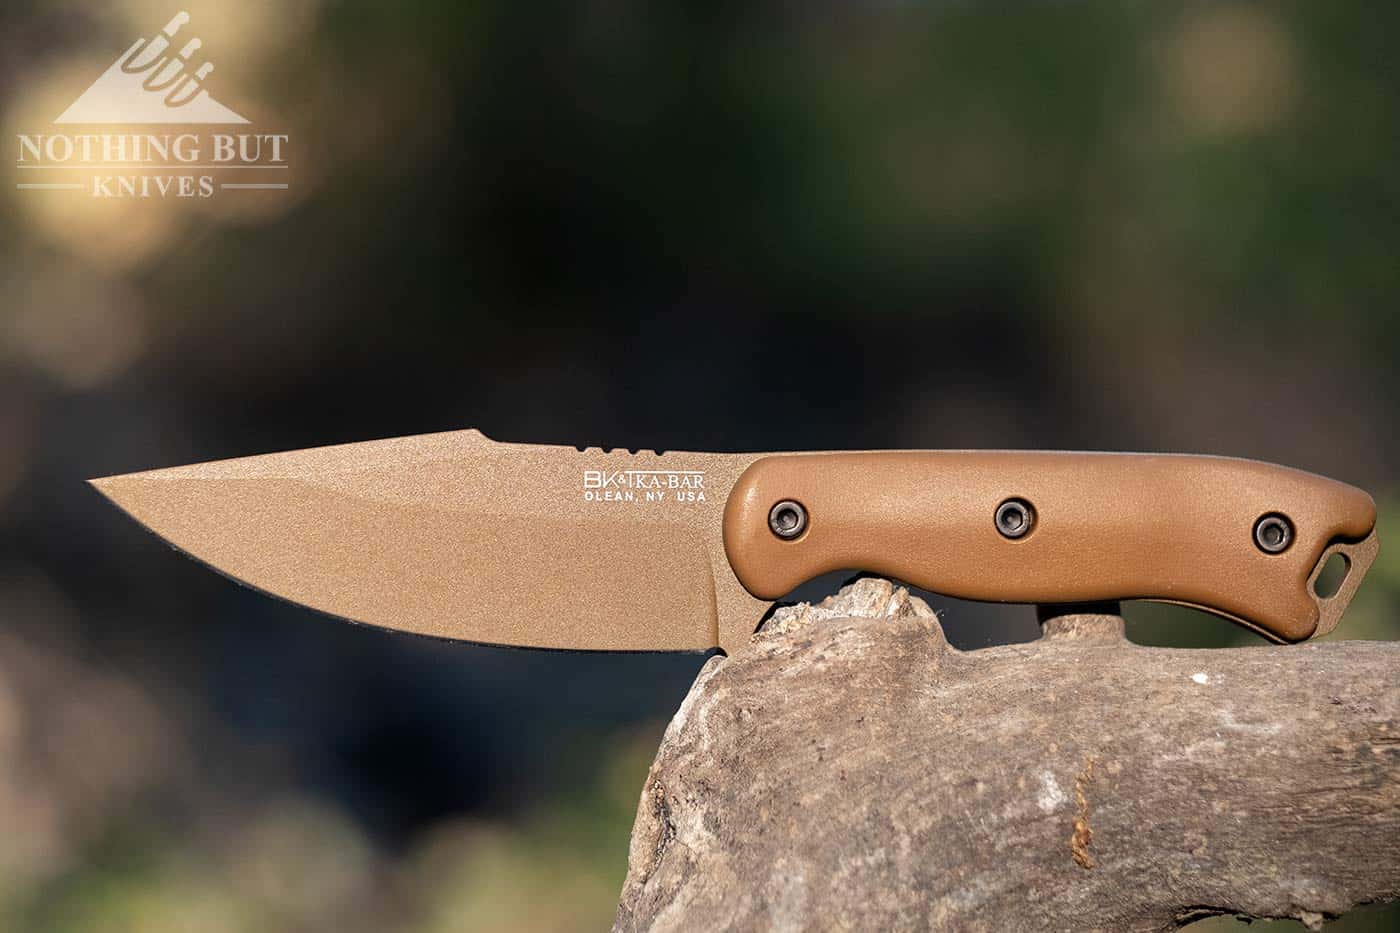 The Ka-Bar Becker BK18 is shown here as a possible alternative to the Ridgeback.